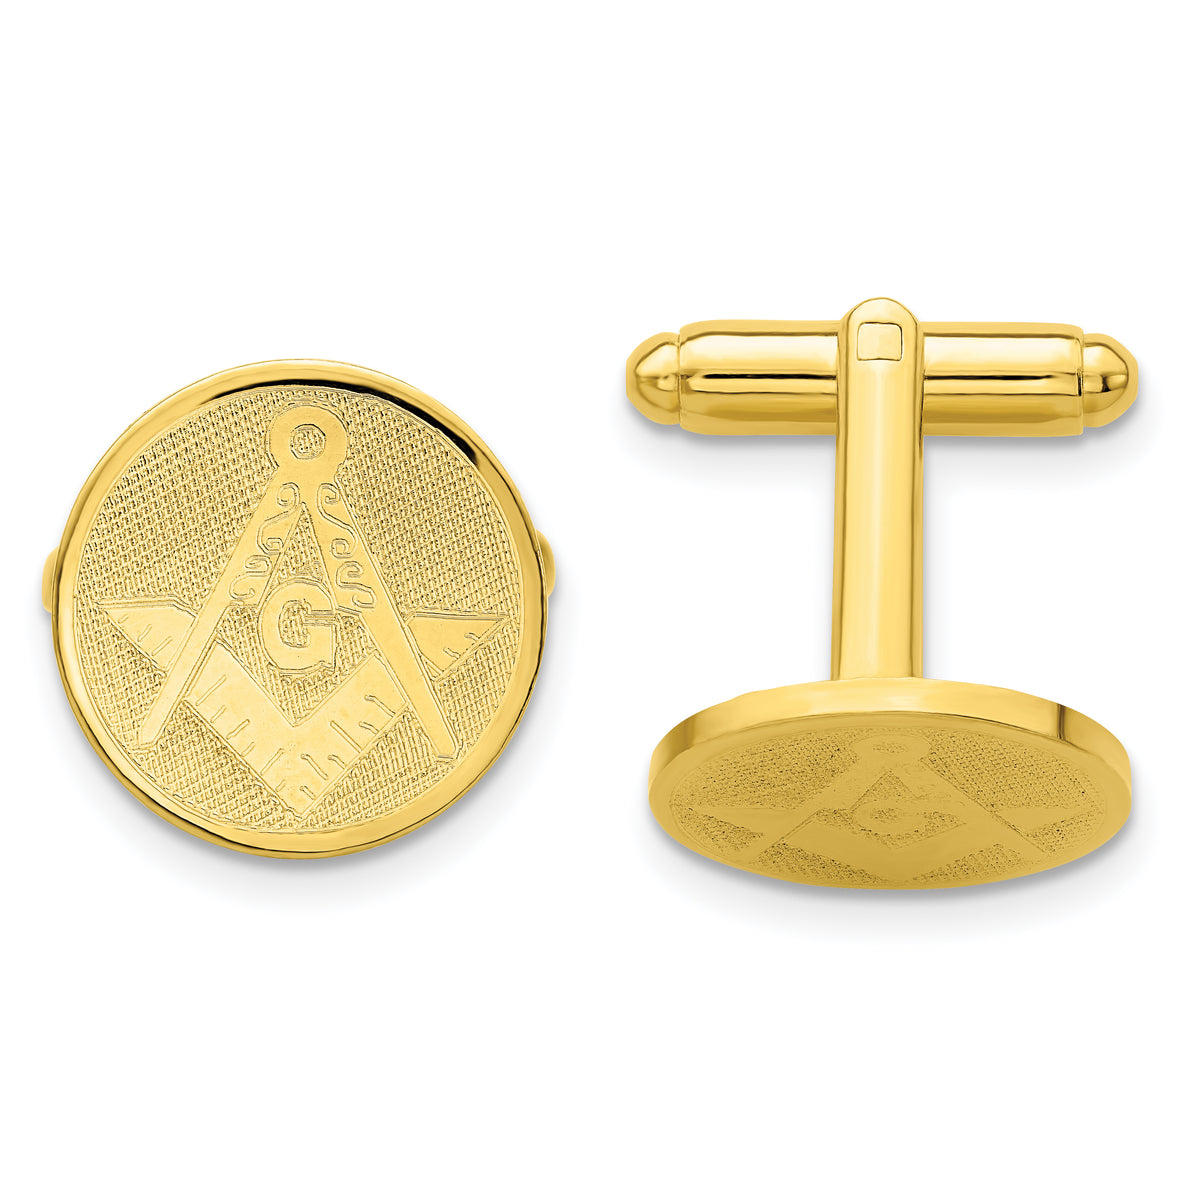 Kelly Waters Gold-plated Round Masonic Cuff Links